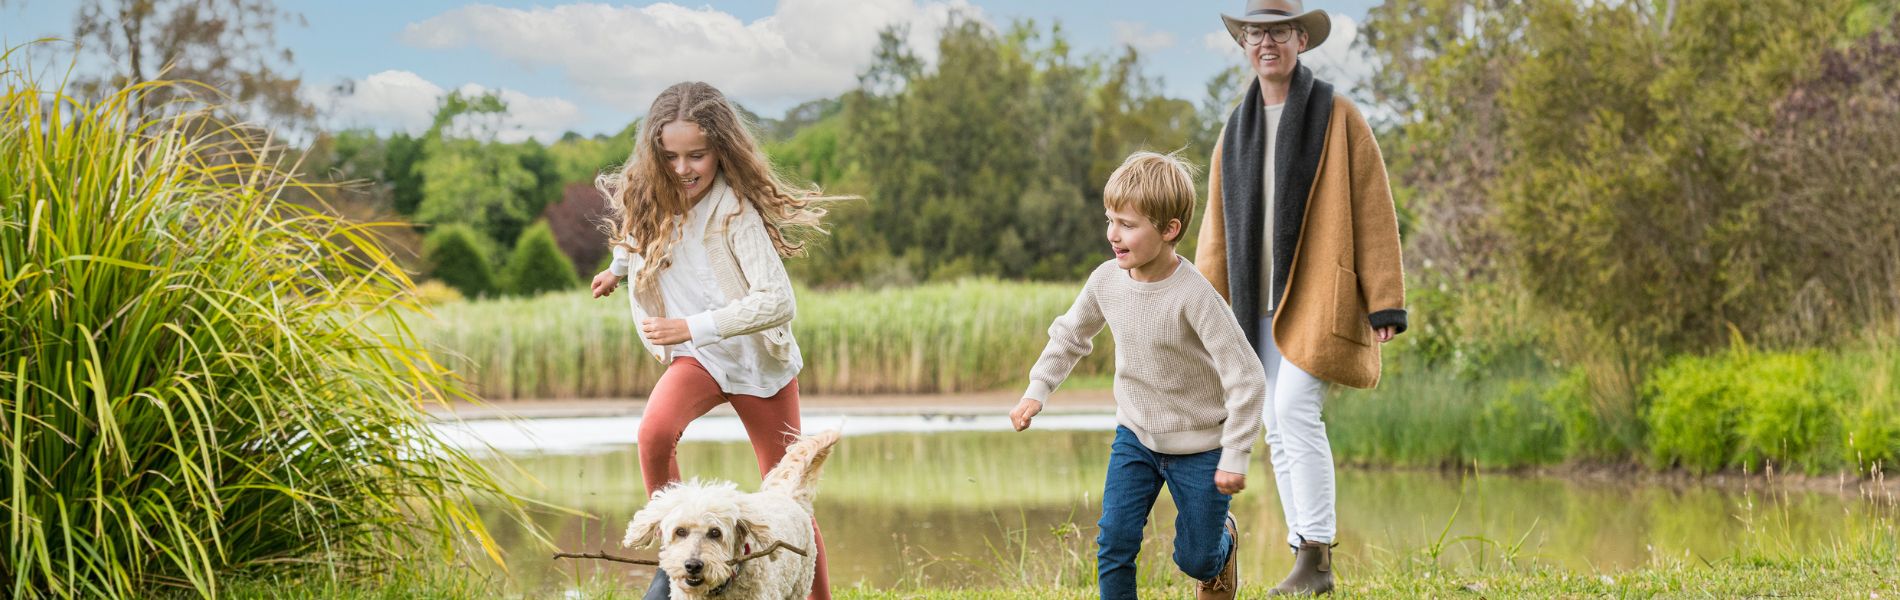 Family running with dog in parkland in Wingecarribee Shire